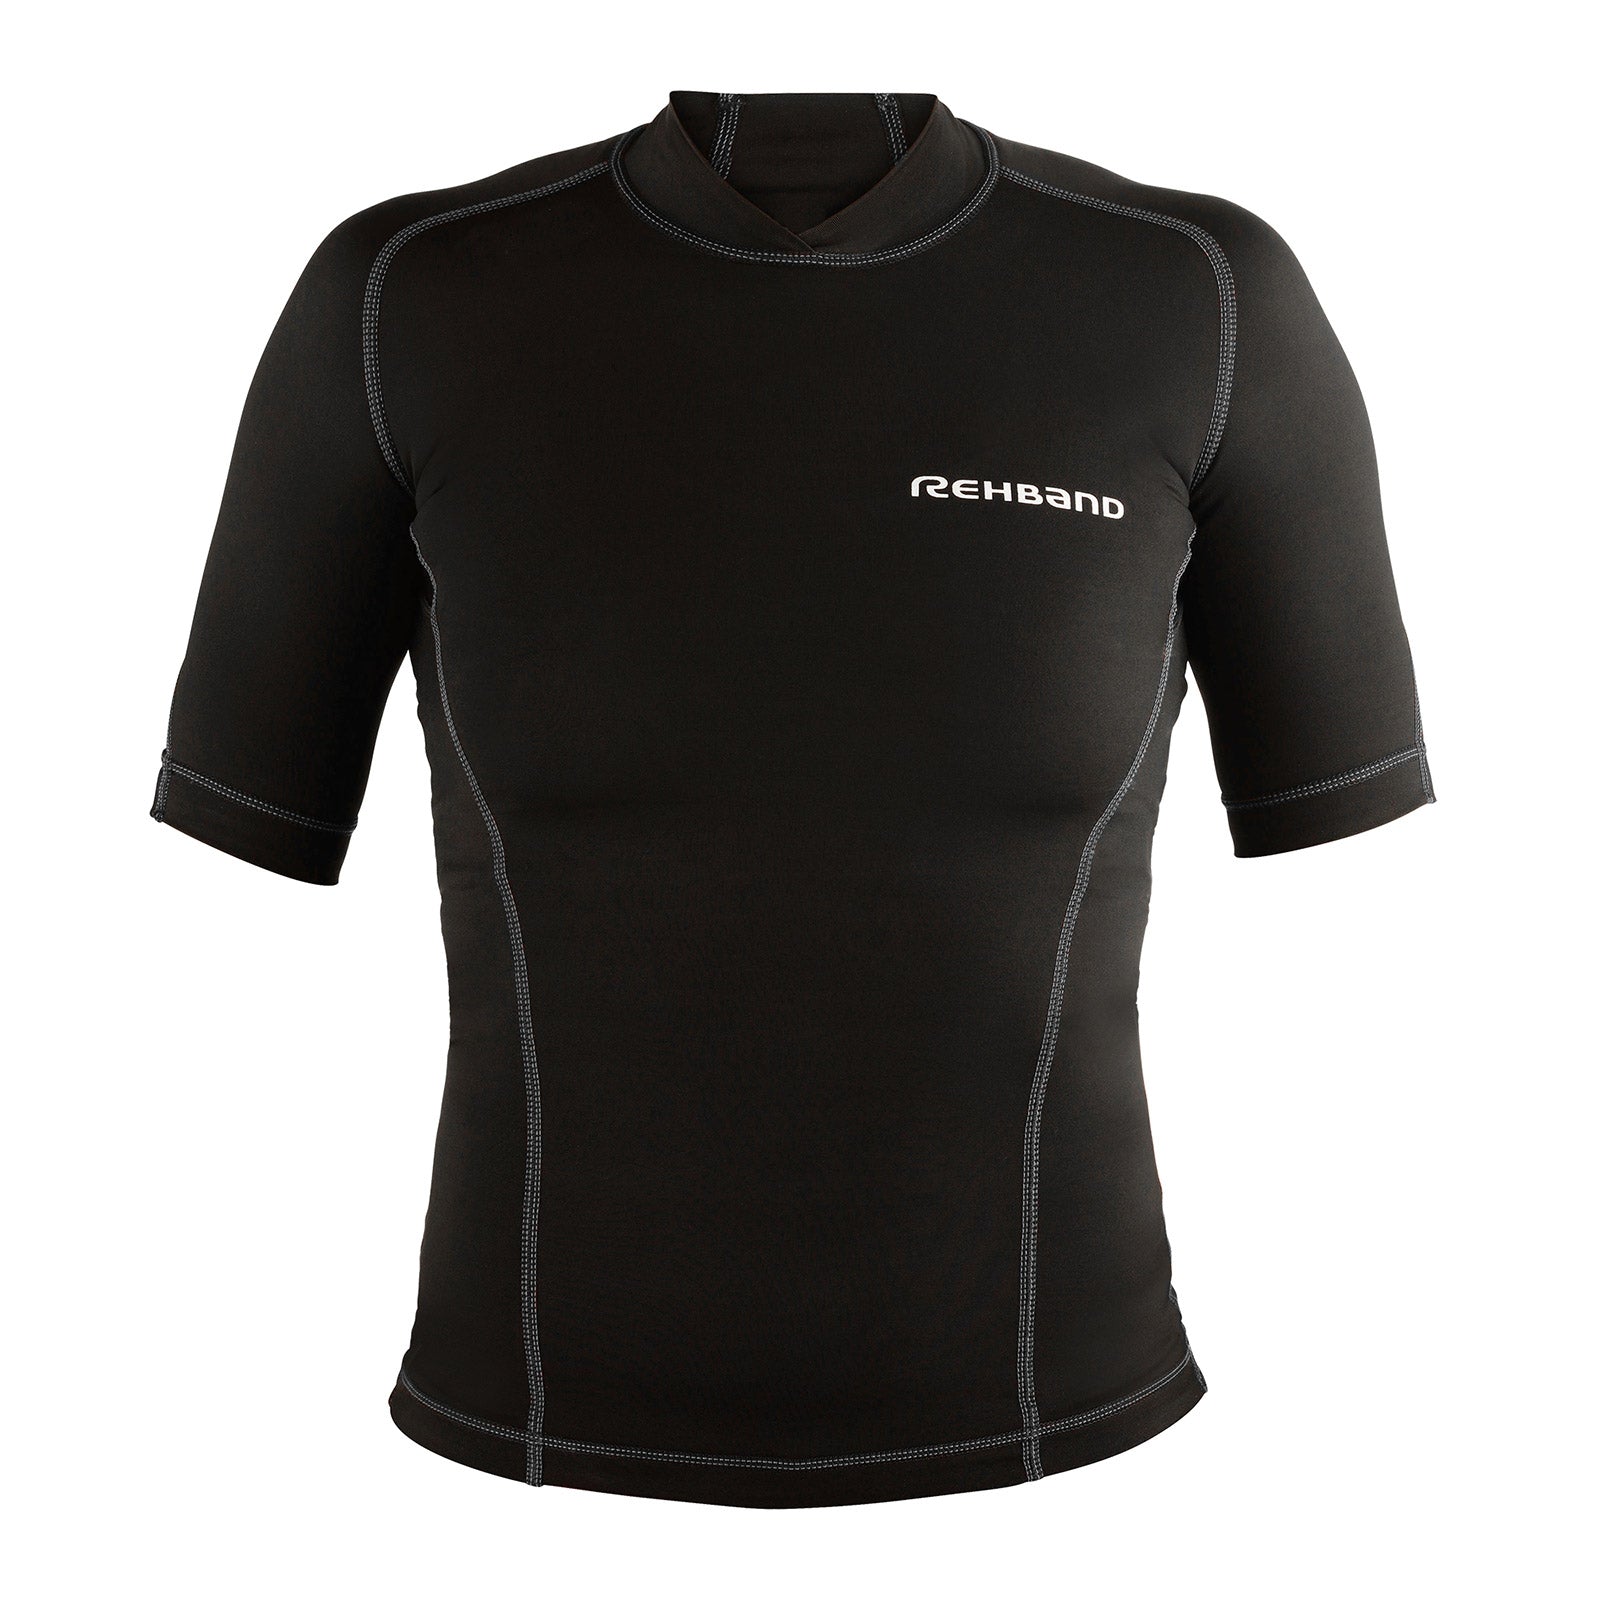 A black compression top for women with a white Rehband lettering on the chest